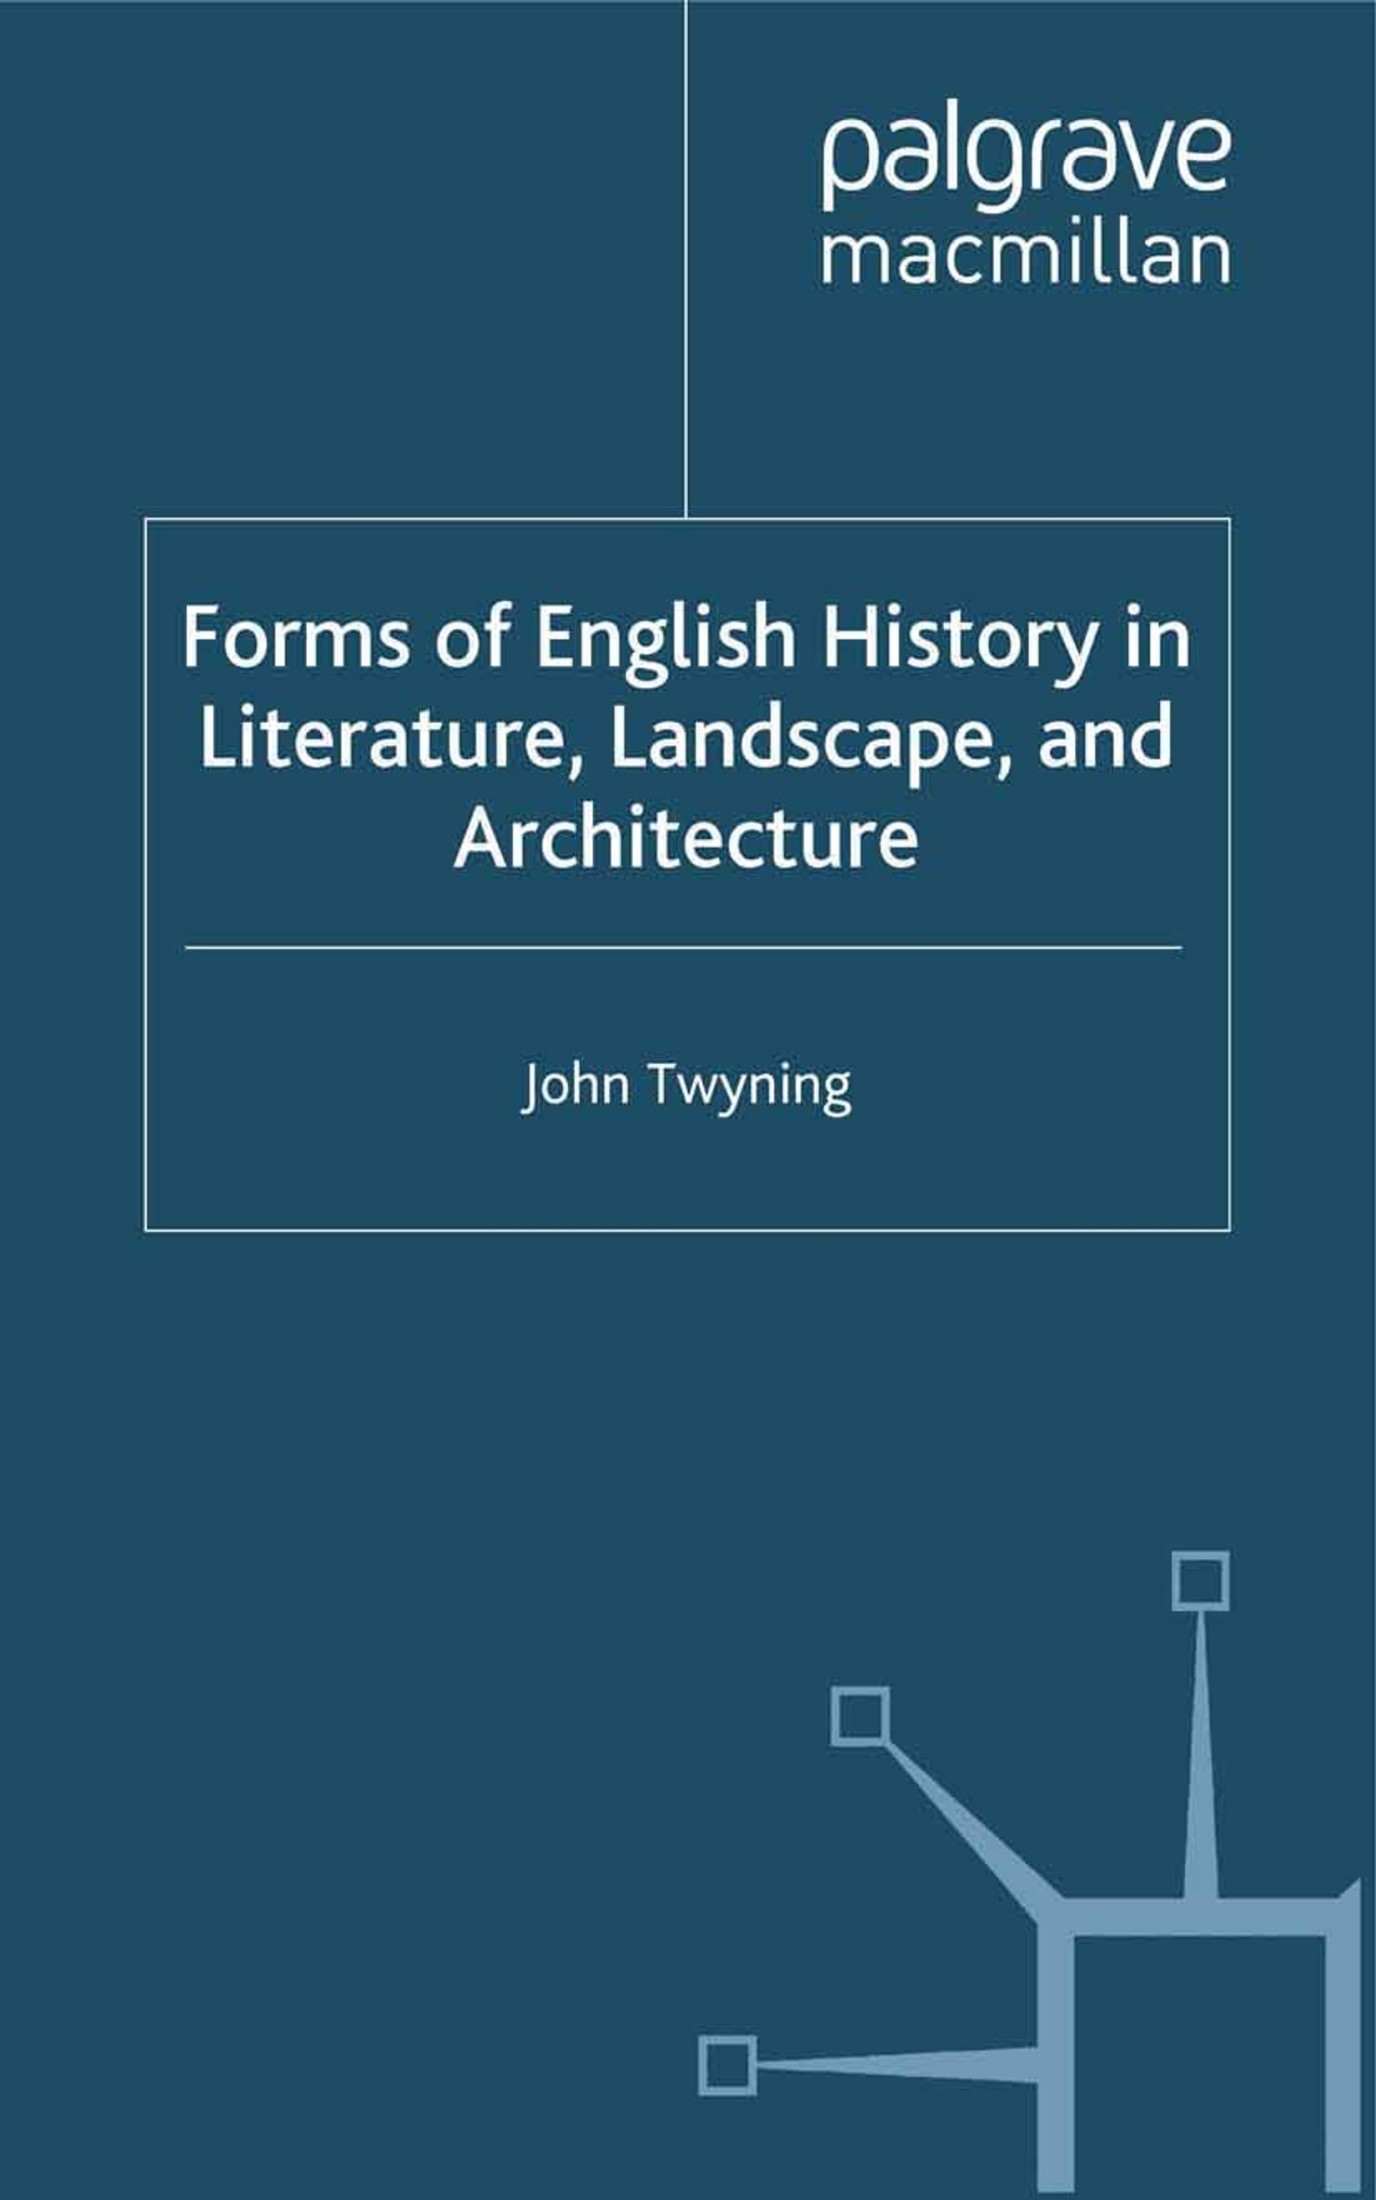 Forms of English History in Literature, Landscape, and Architecture